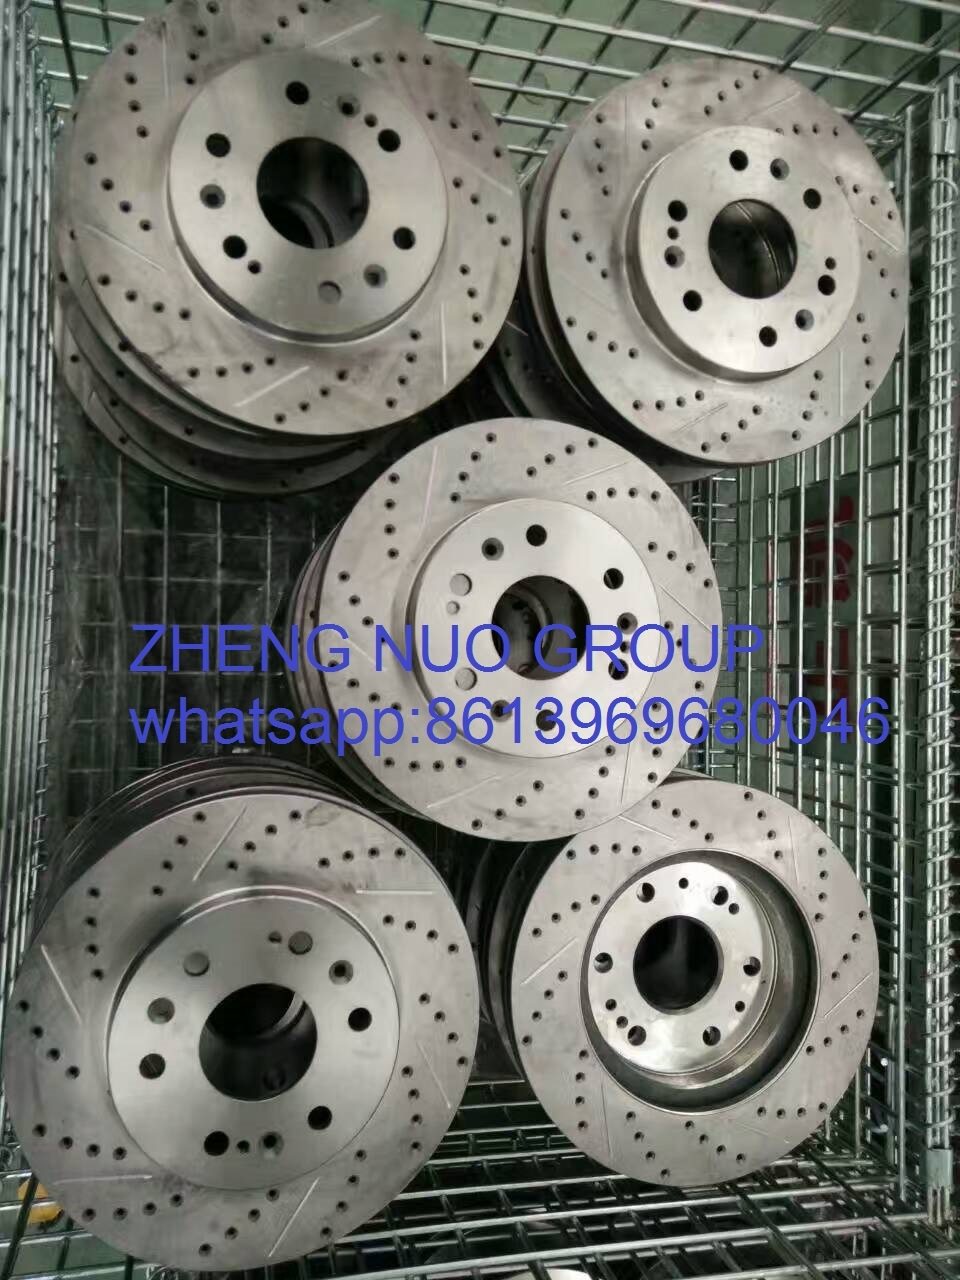 Auto Parts Car Brake Rotors for Jaguar/ Ford From Expert Chinese Manufacturer